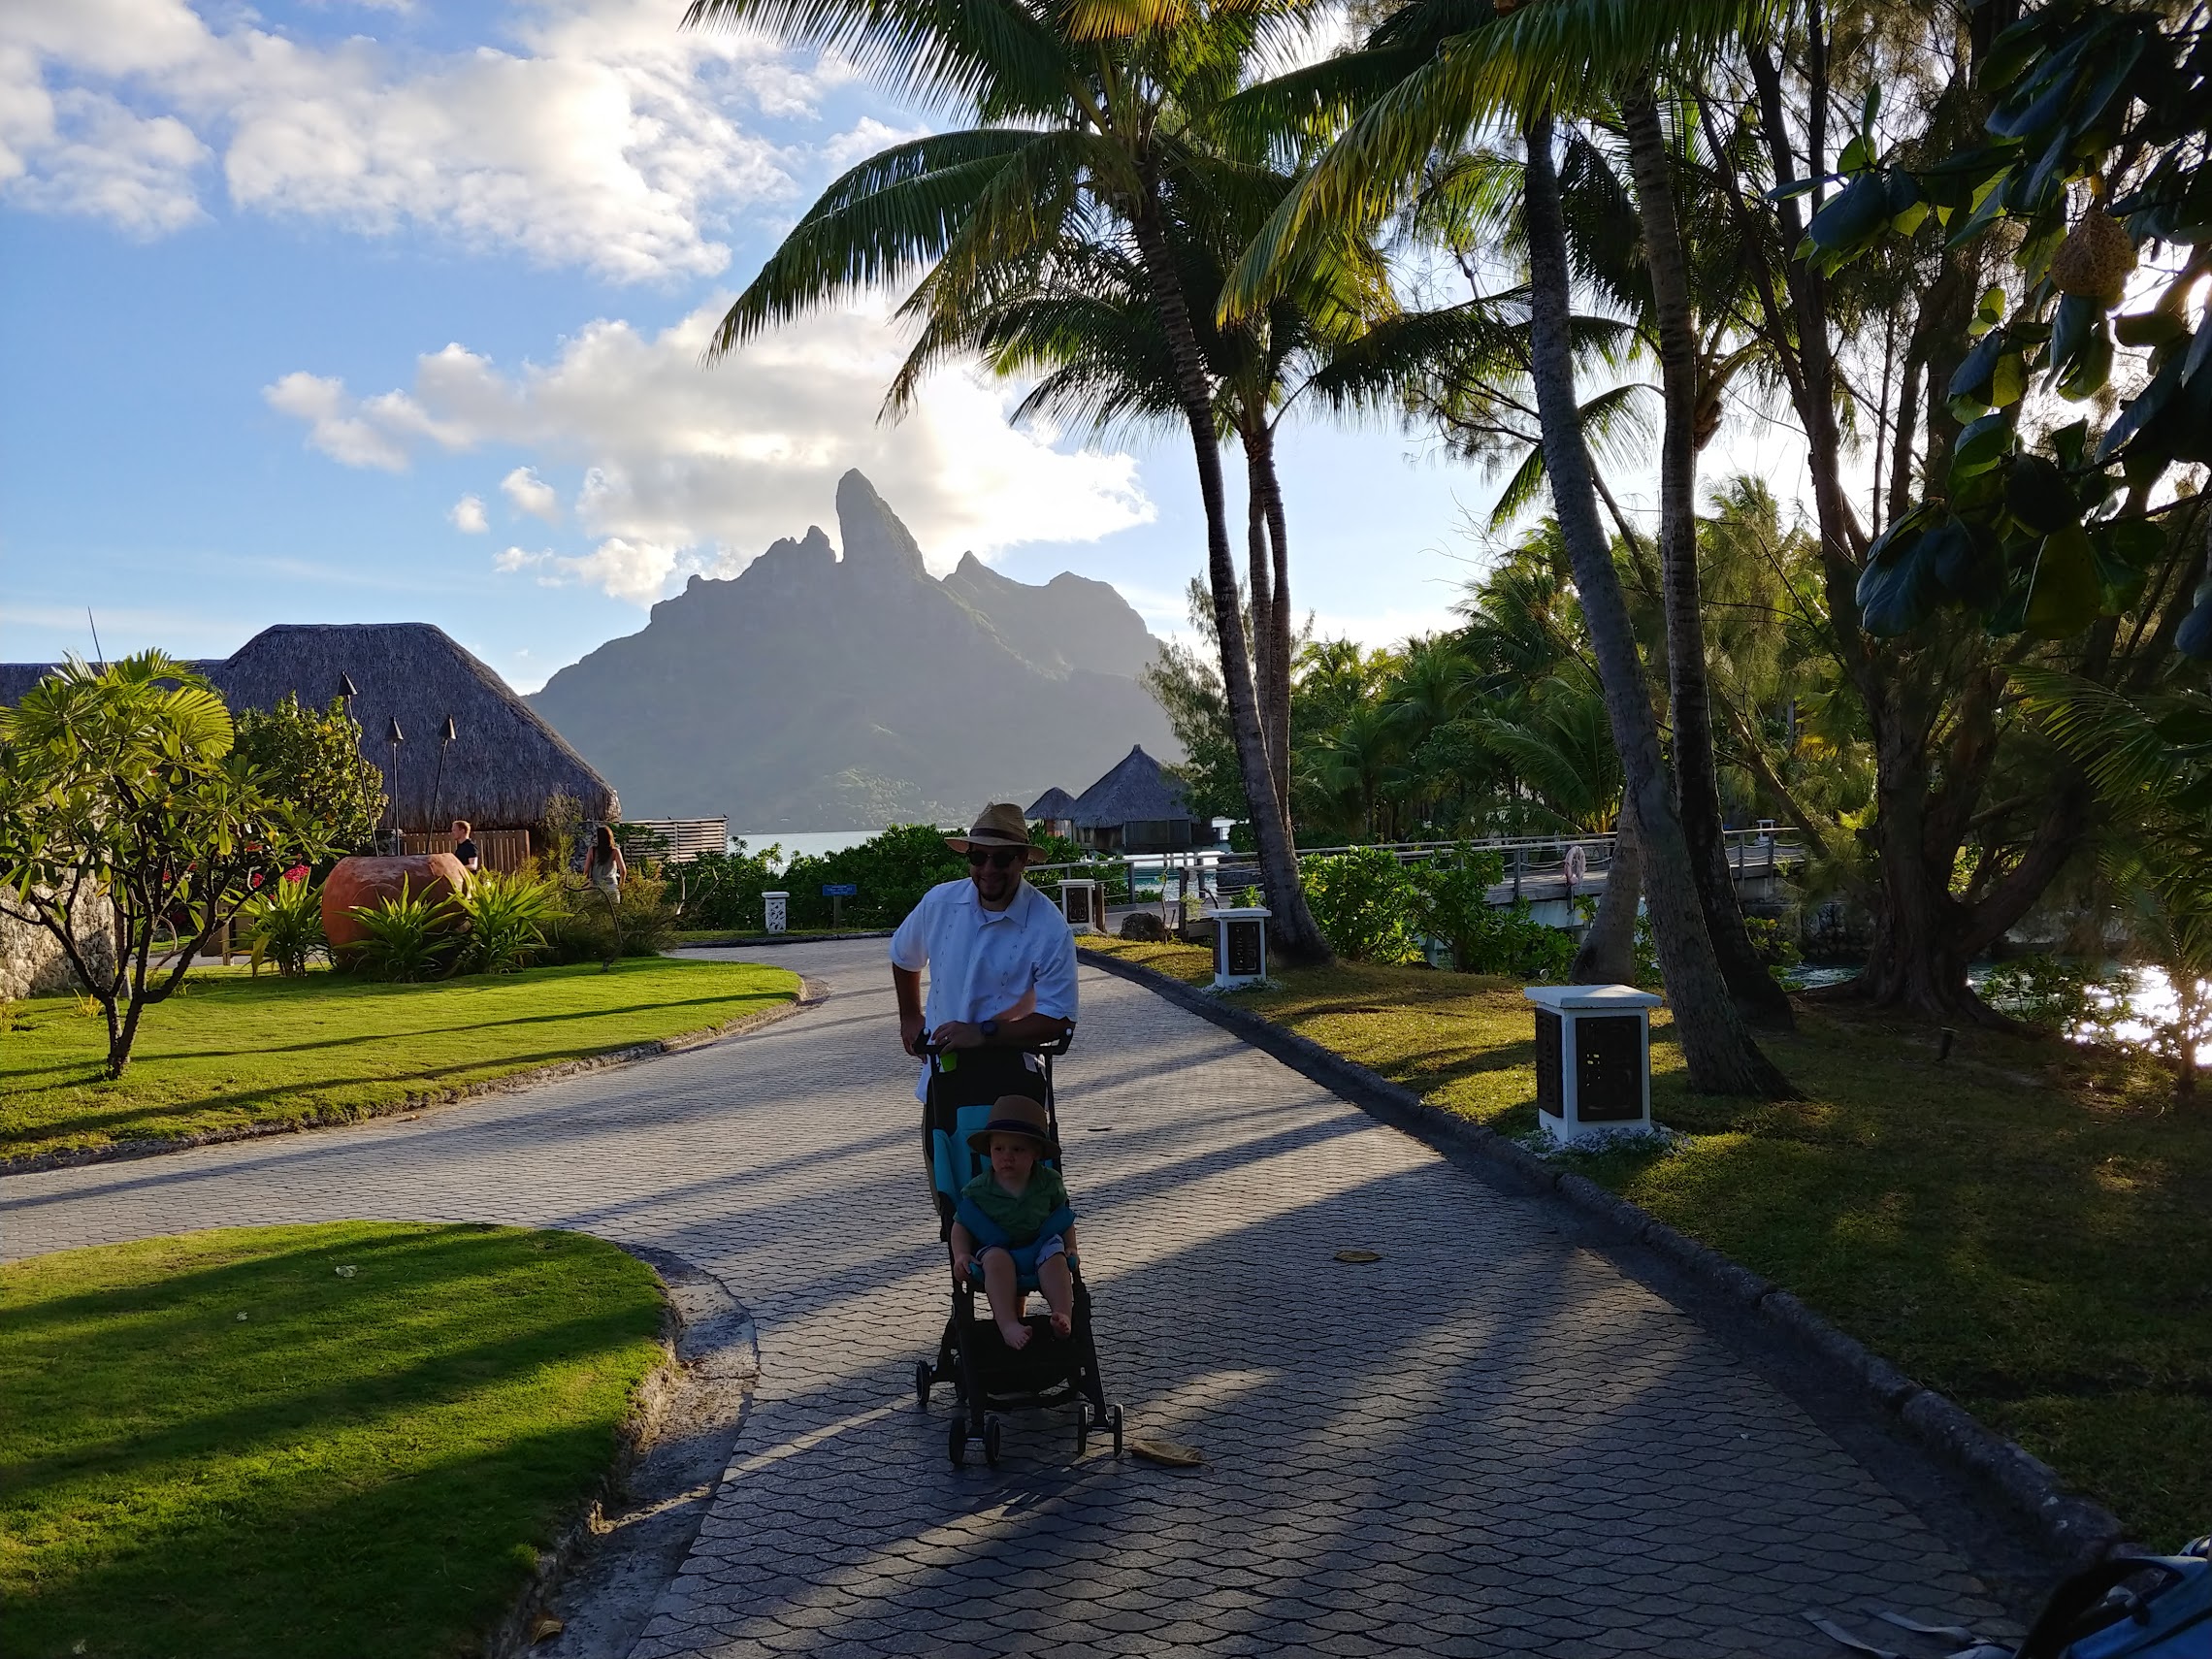 a man pushing a stroller on a path with palm trees and a mountain in the background